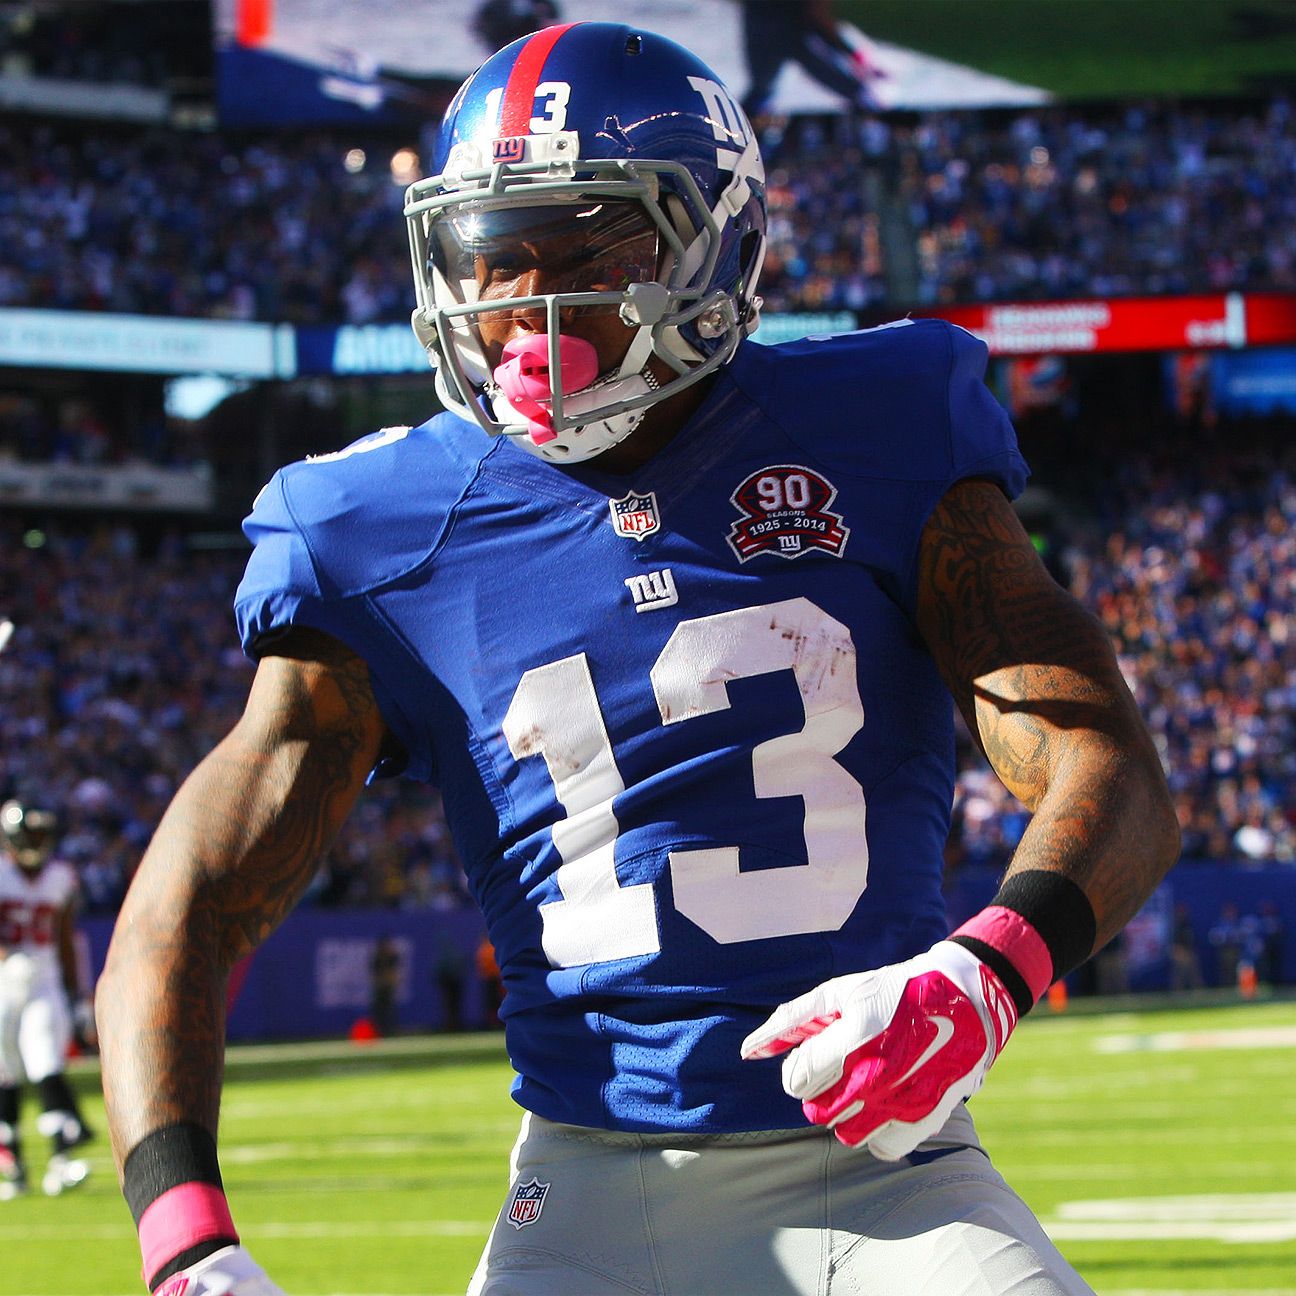 New York Giants rookie wideout Odell Beckham Jr. was worth the wait